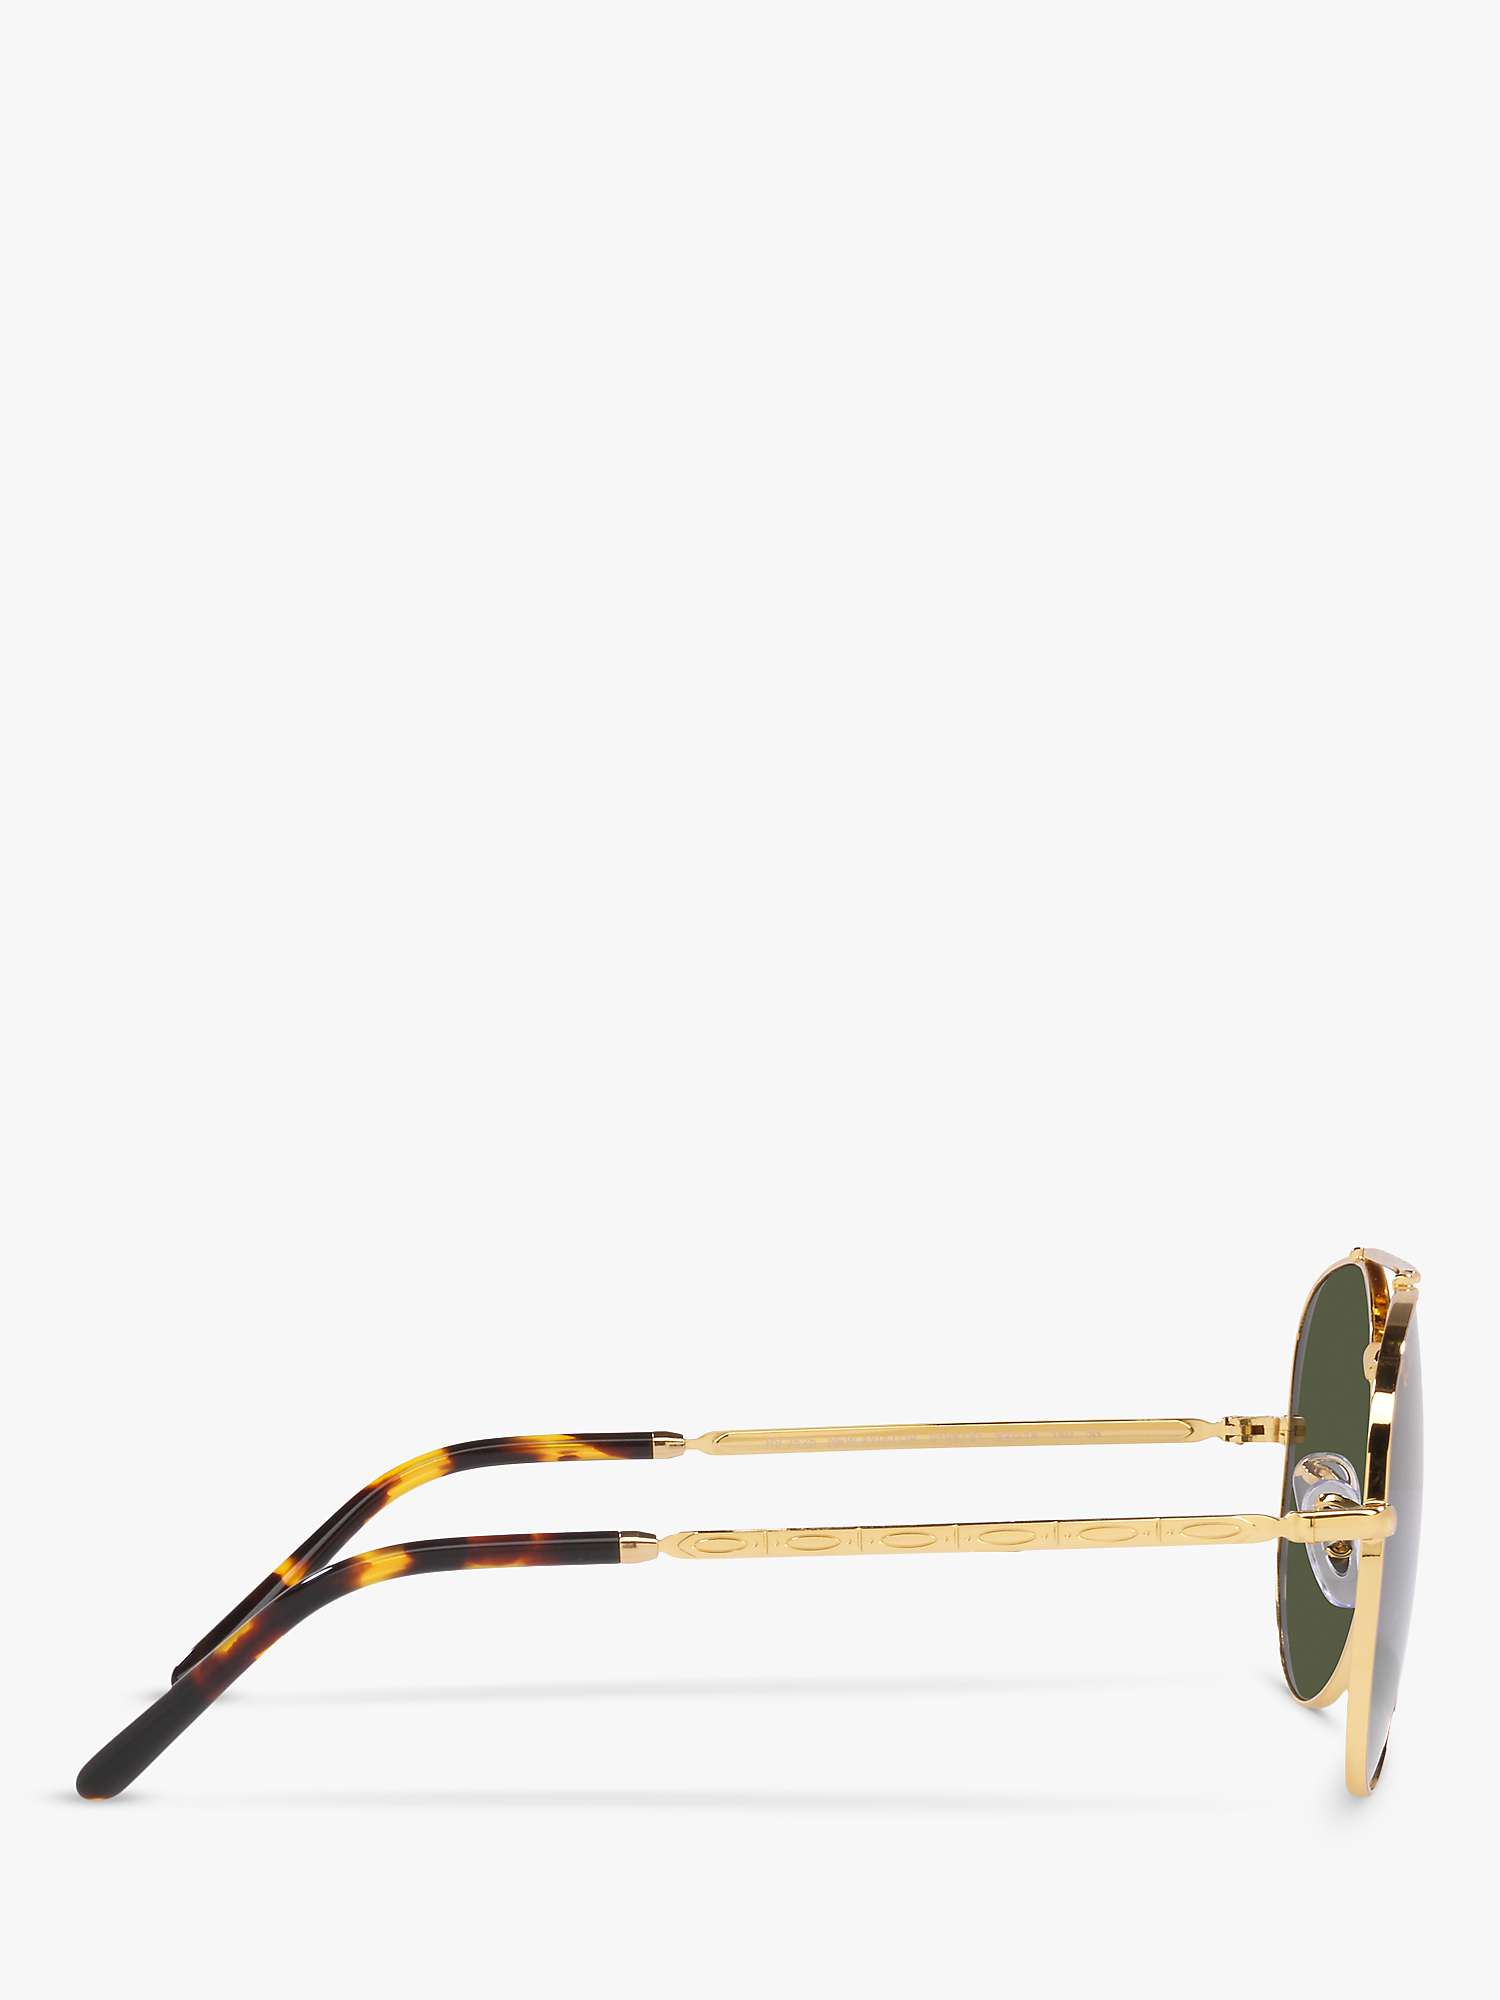 Buy Ray-Ban RB3625 Unisex Aviator Sunglasses, Legend Gold/Green Online at johnlewis.com